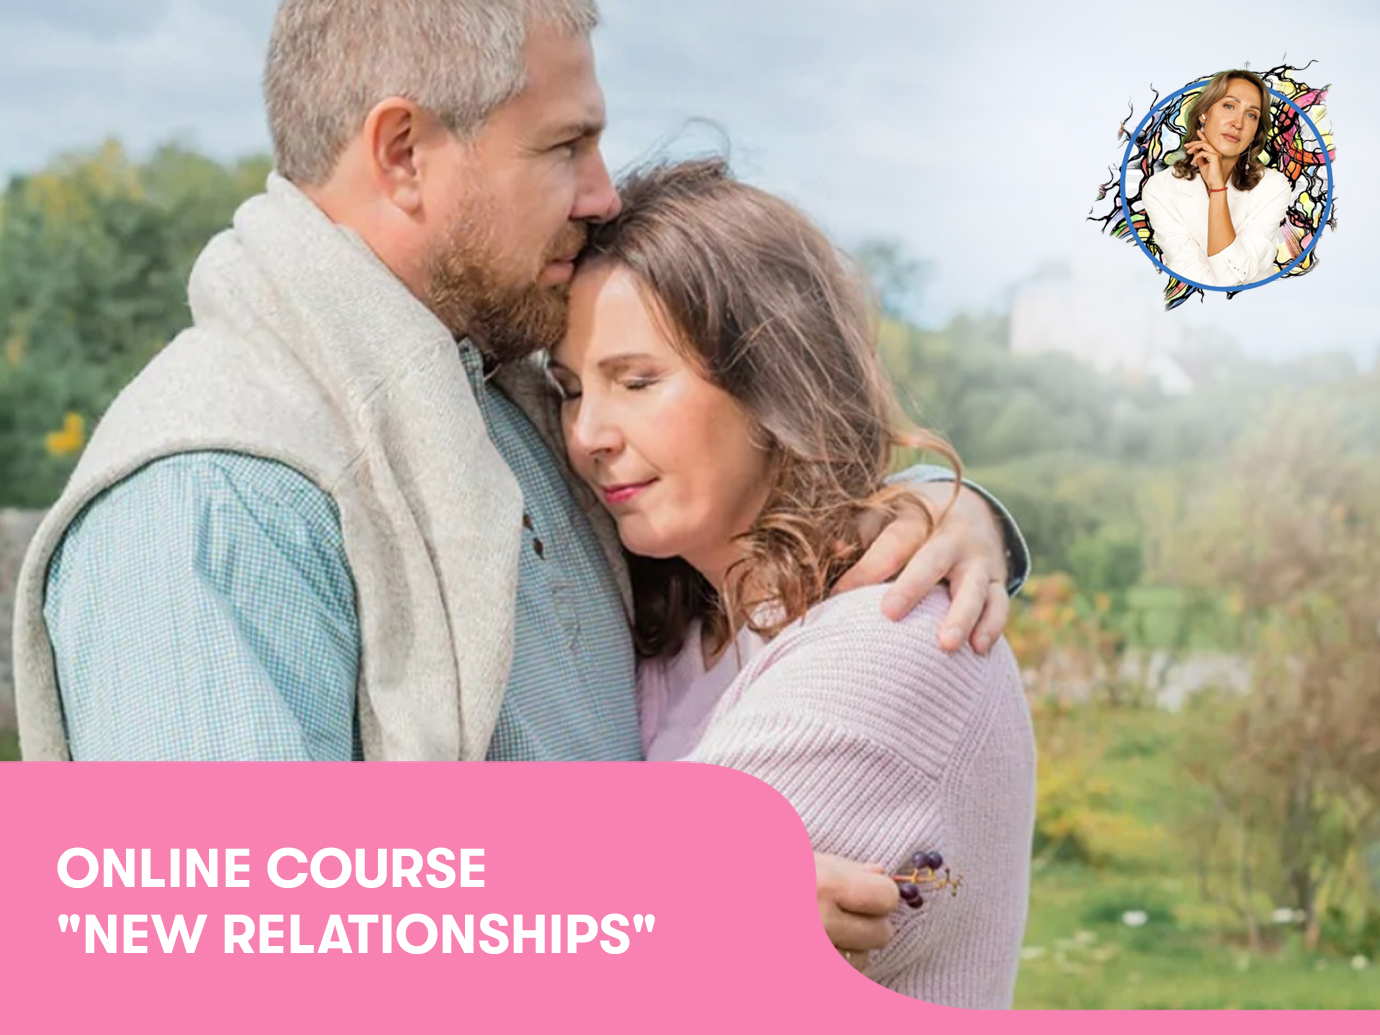 Online course “New Relationships“